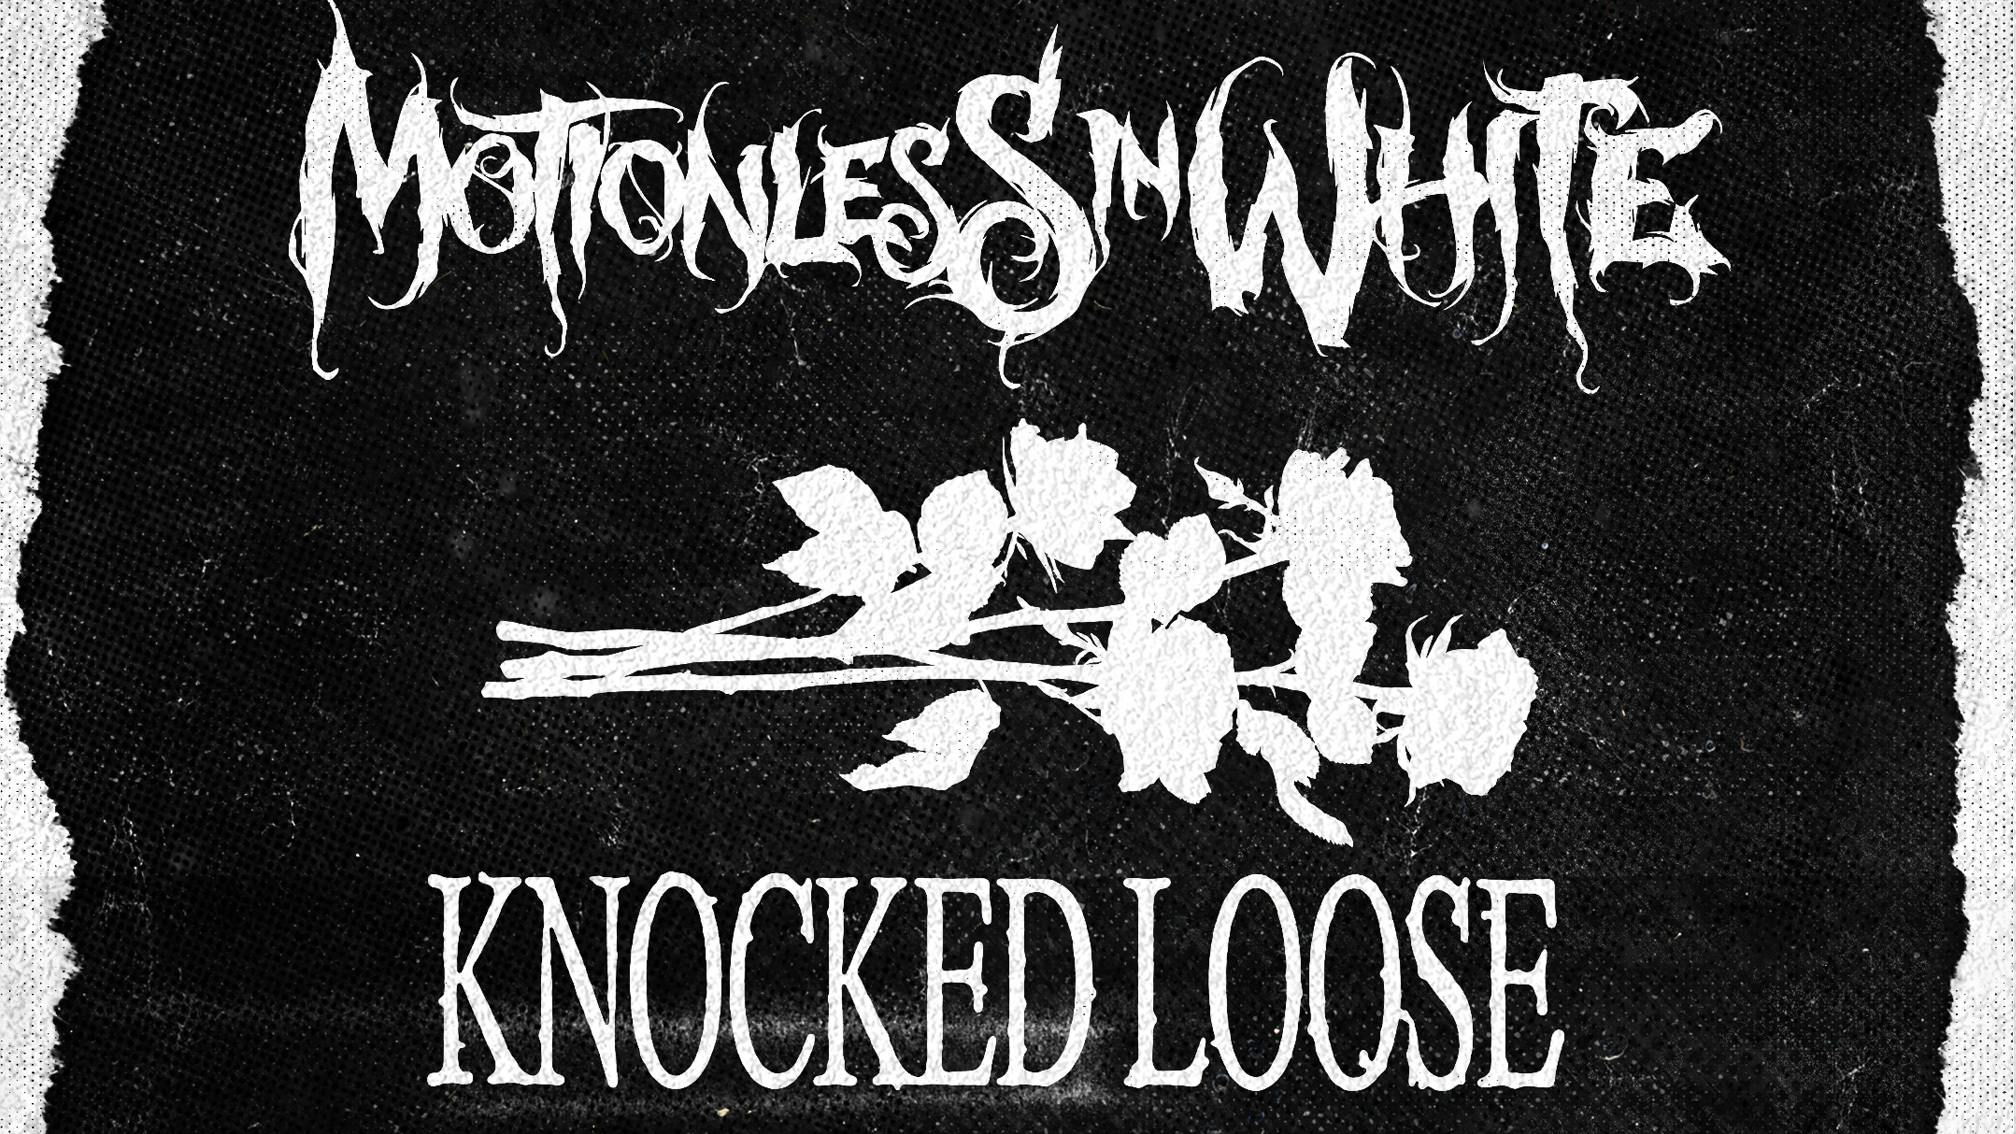 Motionless In White Announce U.S. Tour With Knocked Loose, Stick To Your Guns